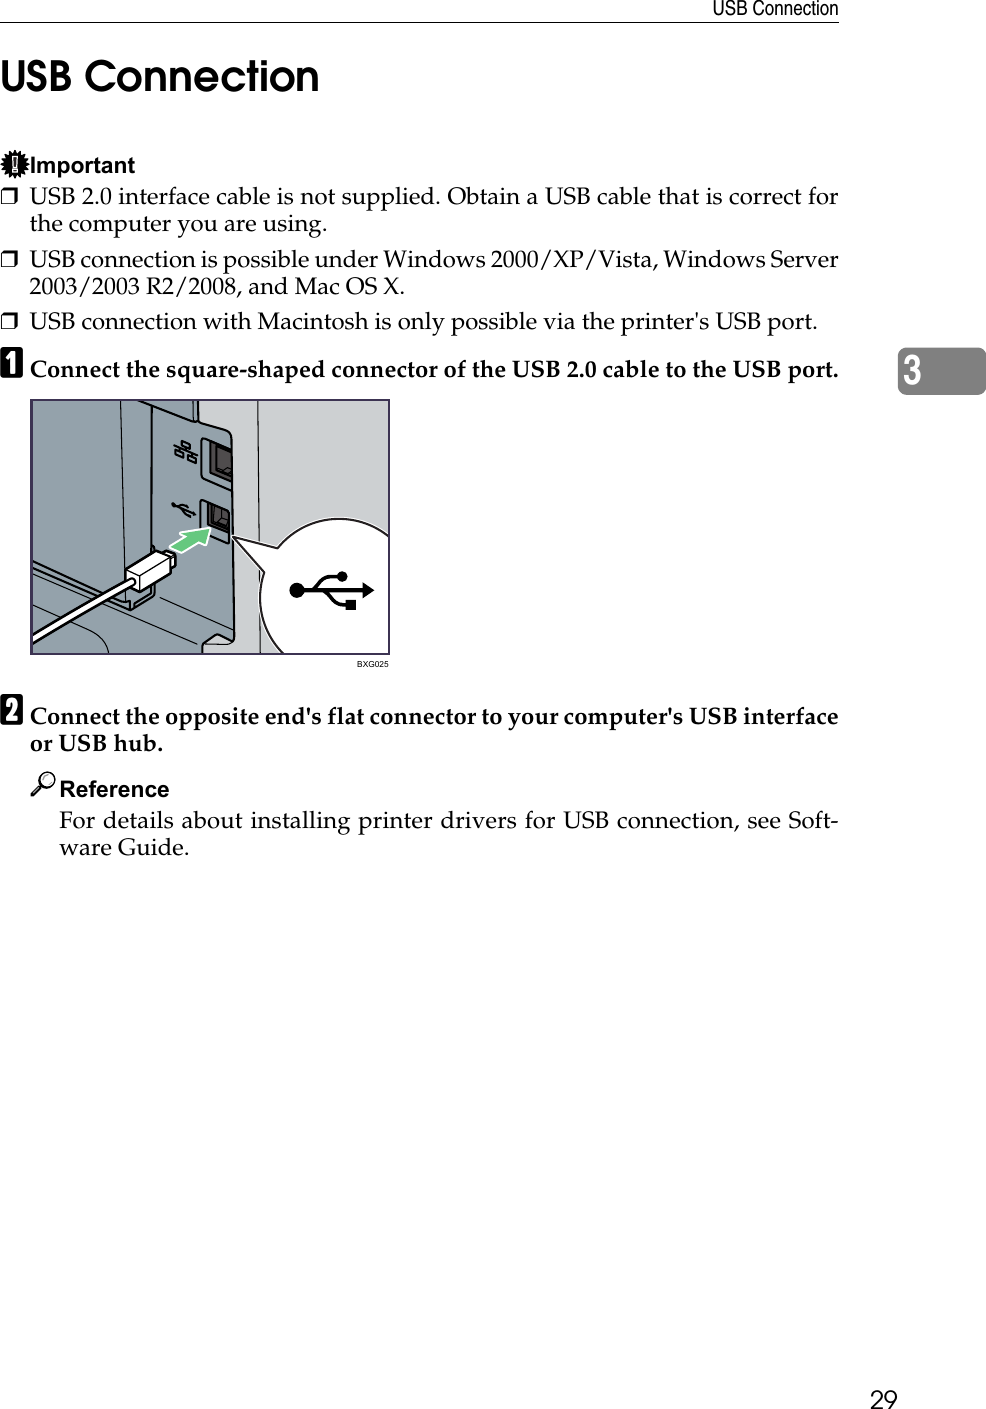 USB Connection293USB ConnectionImportant❒USB 2.0 interface cable is not supplied. Obtain a USB cable that is correct forthe computer you are using.❒USB connection is possible under Windows 2000/XP/Vista, Windows Server2003/2003 R2/2008, and Mac OS X.❒USB connection with Macintosh is only possible via the printer&apos;s USB port. AConnect the square-shaped connector of the USB 2.0 cable to the USB port.BConnect the opposite end&apos;s flat connector to your computer&apos;s USB interfaceor USB hub.ReferenceFor details about installing printer drivers for USB connection, see Soft-ware Guide.BXG025